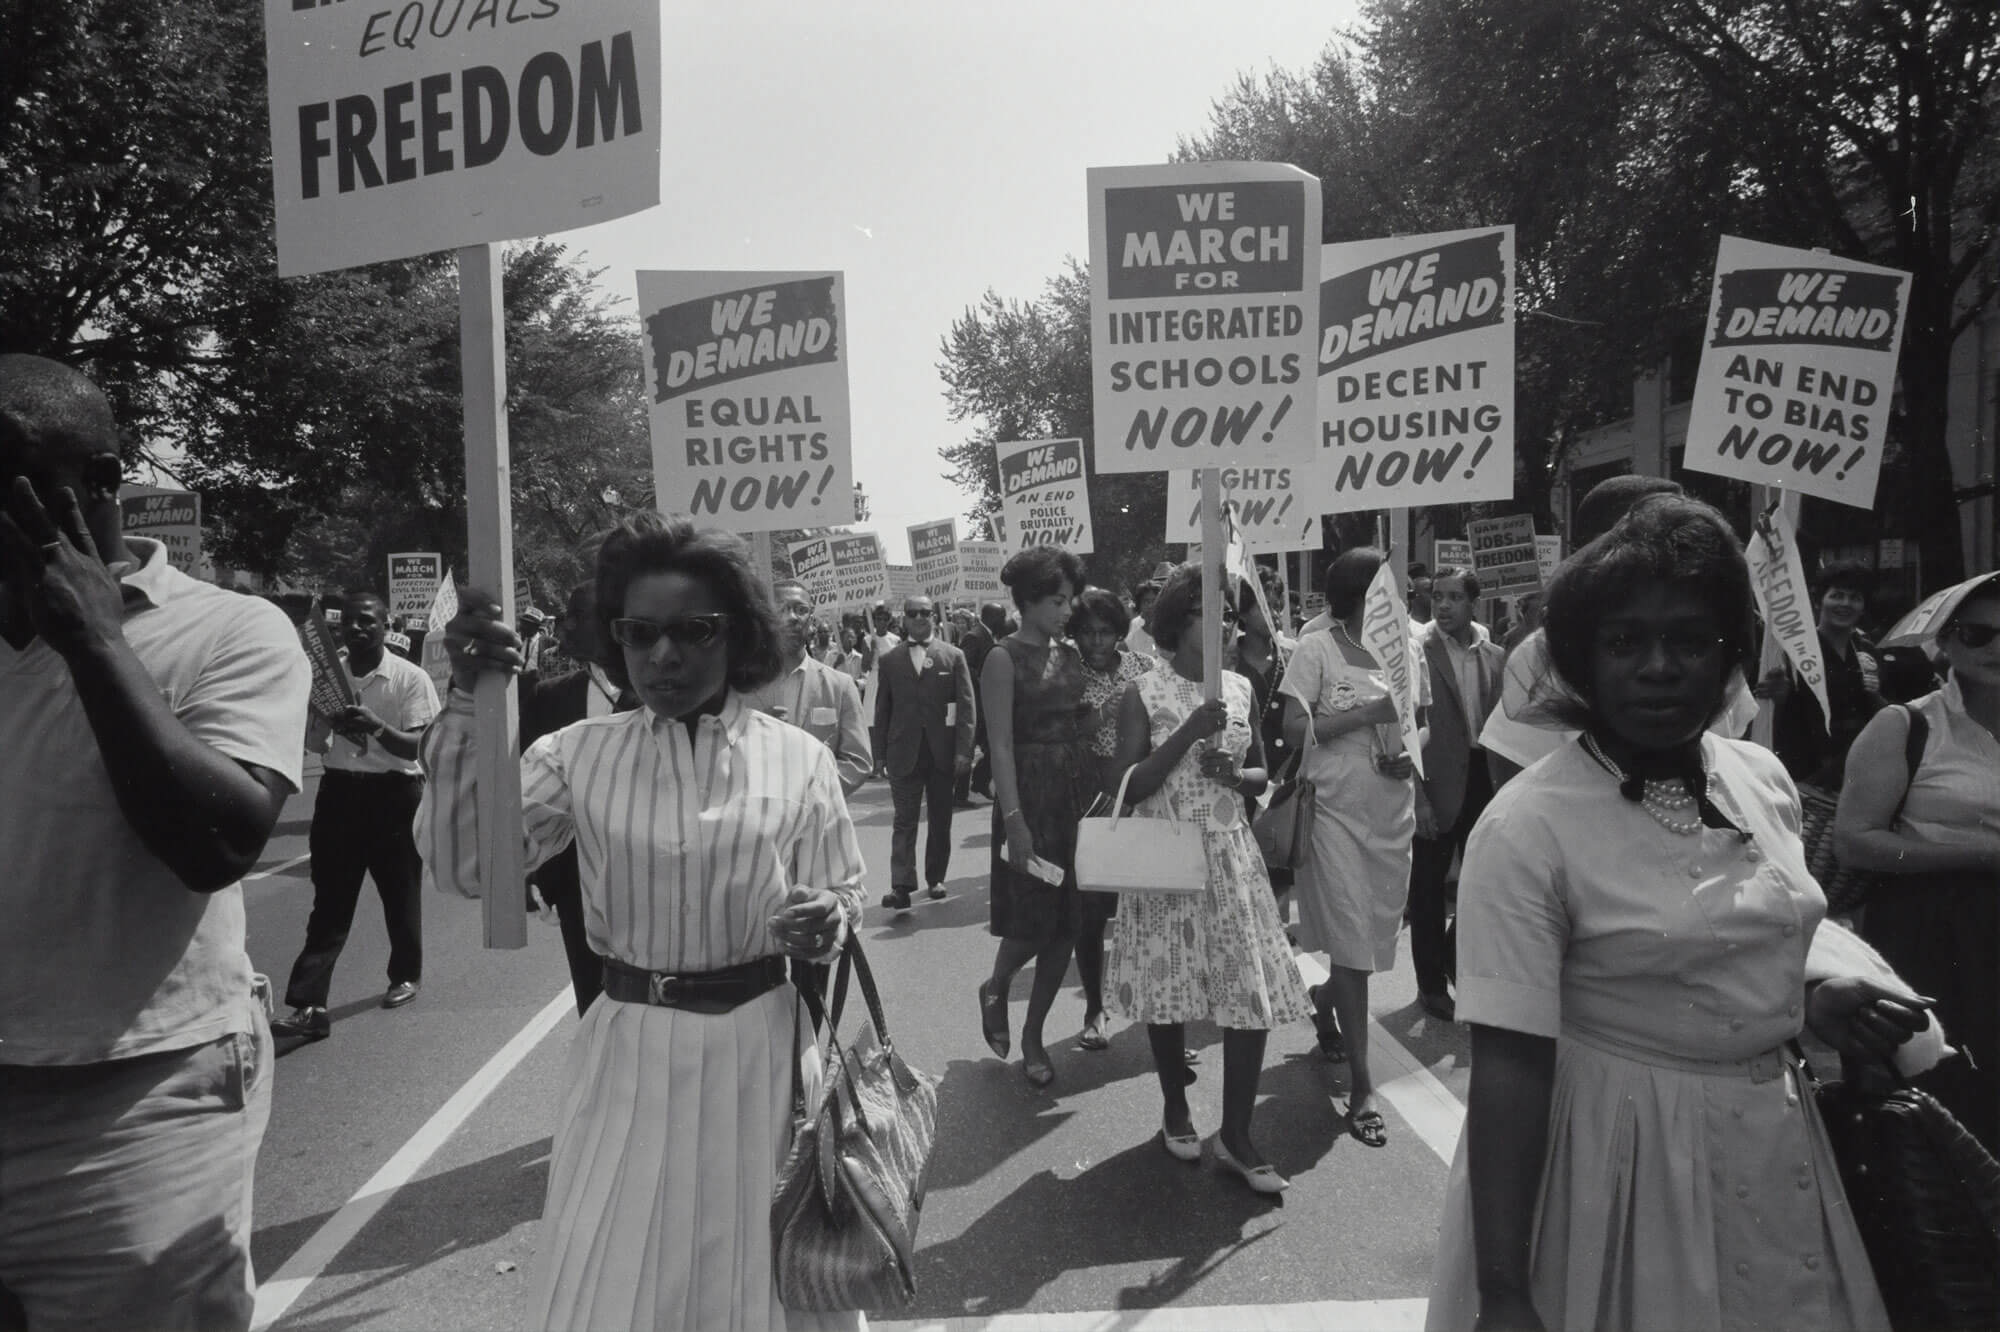 people with signs, marching for civil rights on Washington, D.C. (1963) Library of Congress, https://www.loc.gov/item/2003654393/